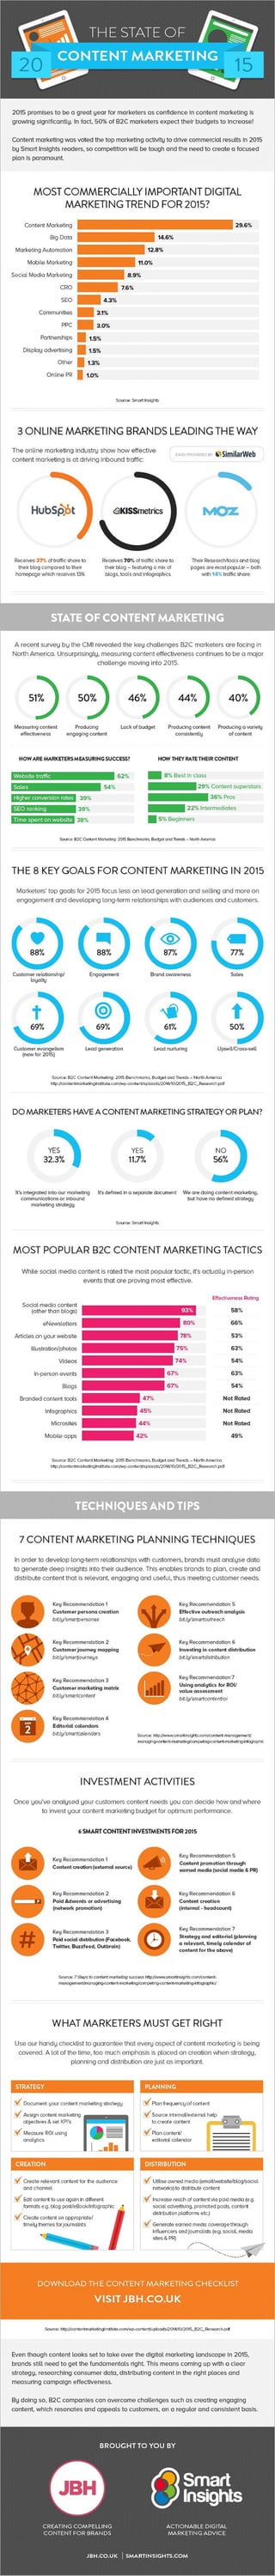 Infografía the state of content marketing